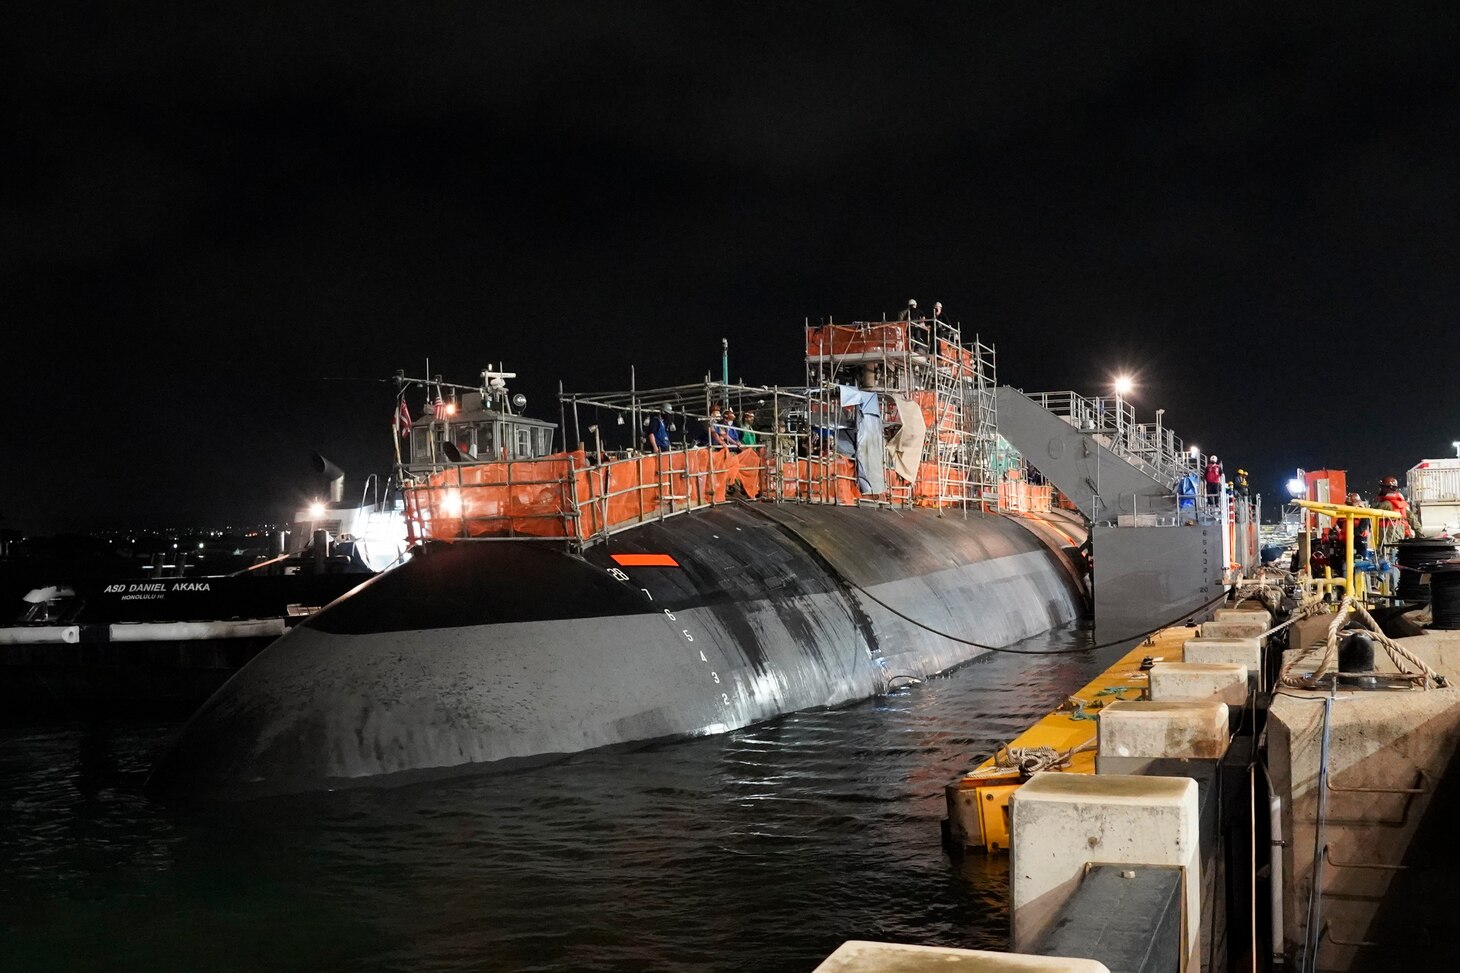 Pearl Harbor Naval Shipyard & Intermediate Maintenance Facility successfully undocked USS Charlotte (SSN 766) Jan. 26 from Dry Dock #3. The undocking was a major milestone in the submarine’s engineered overhaul availability.